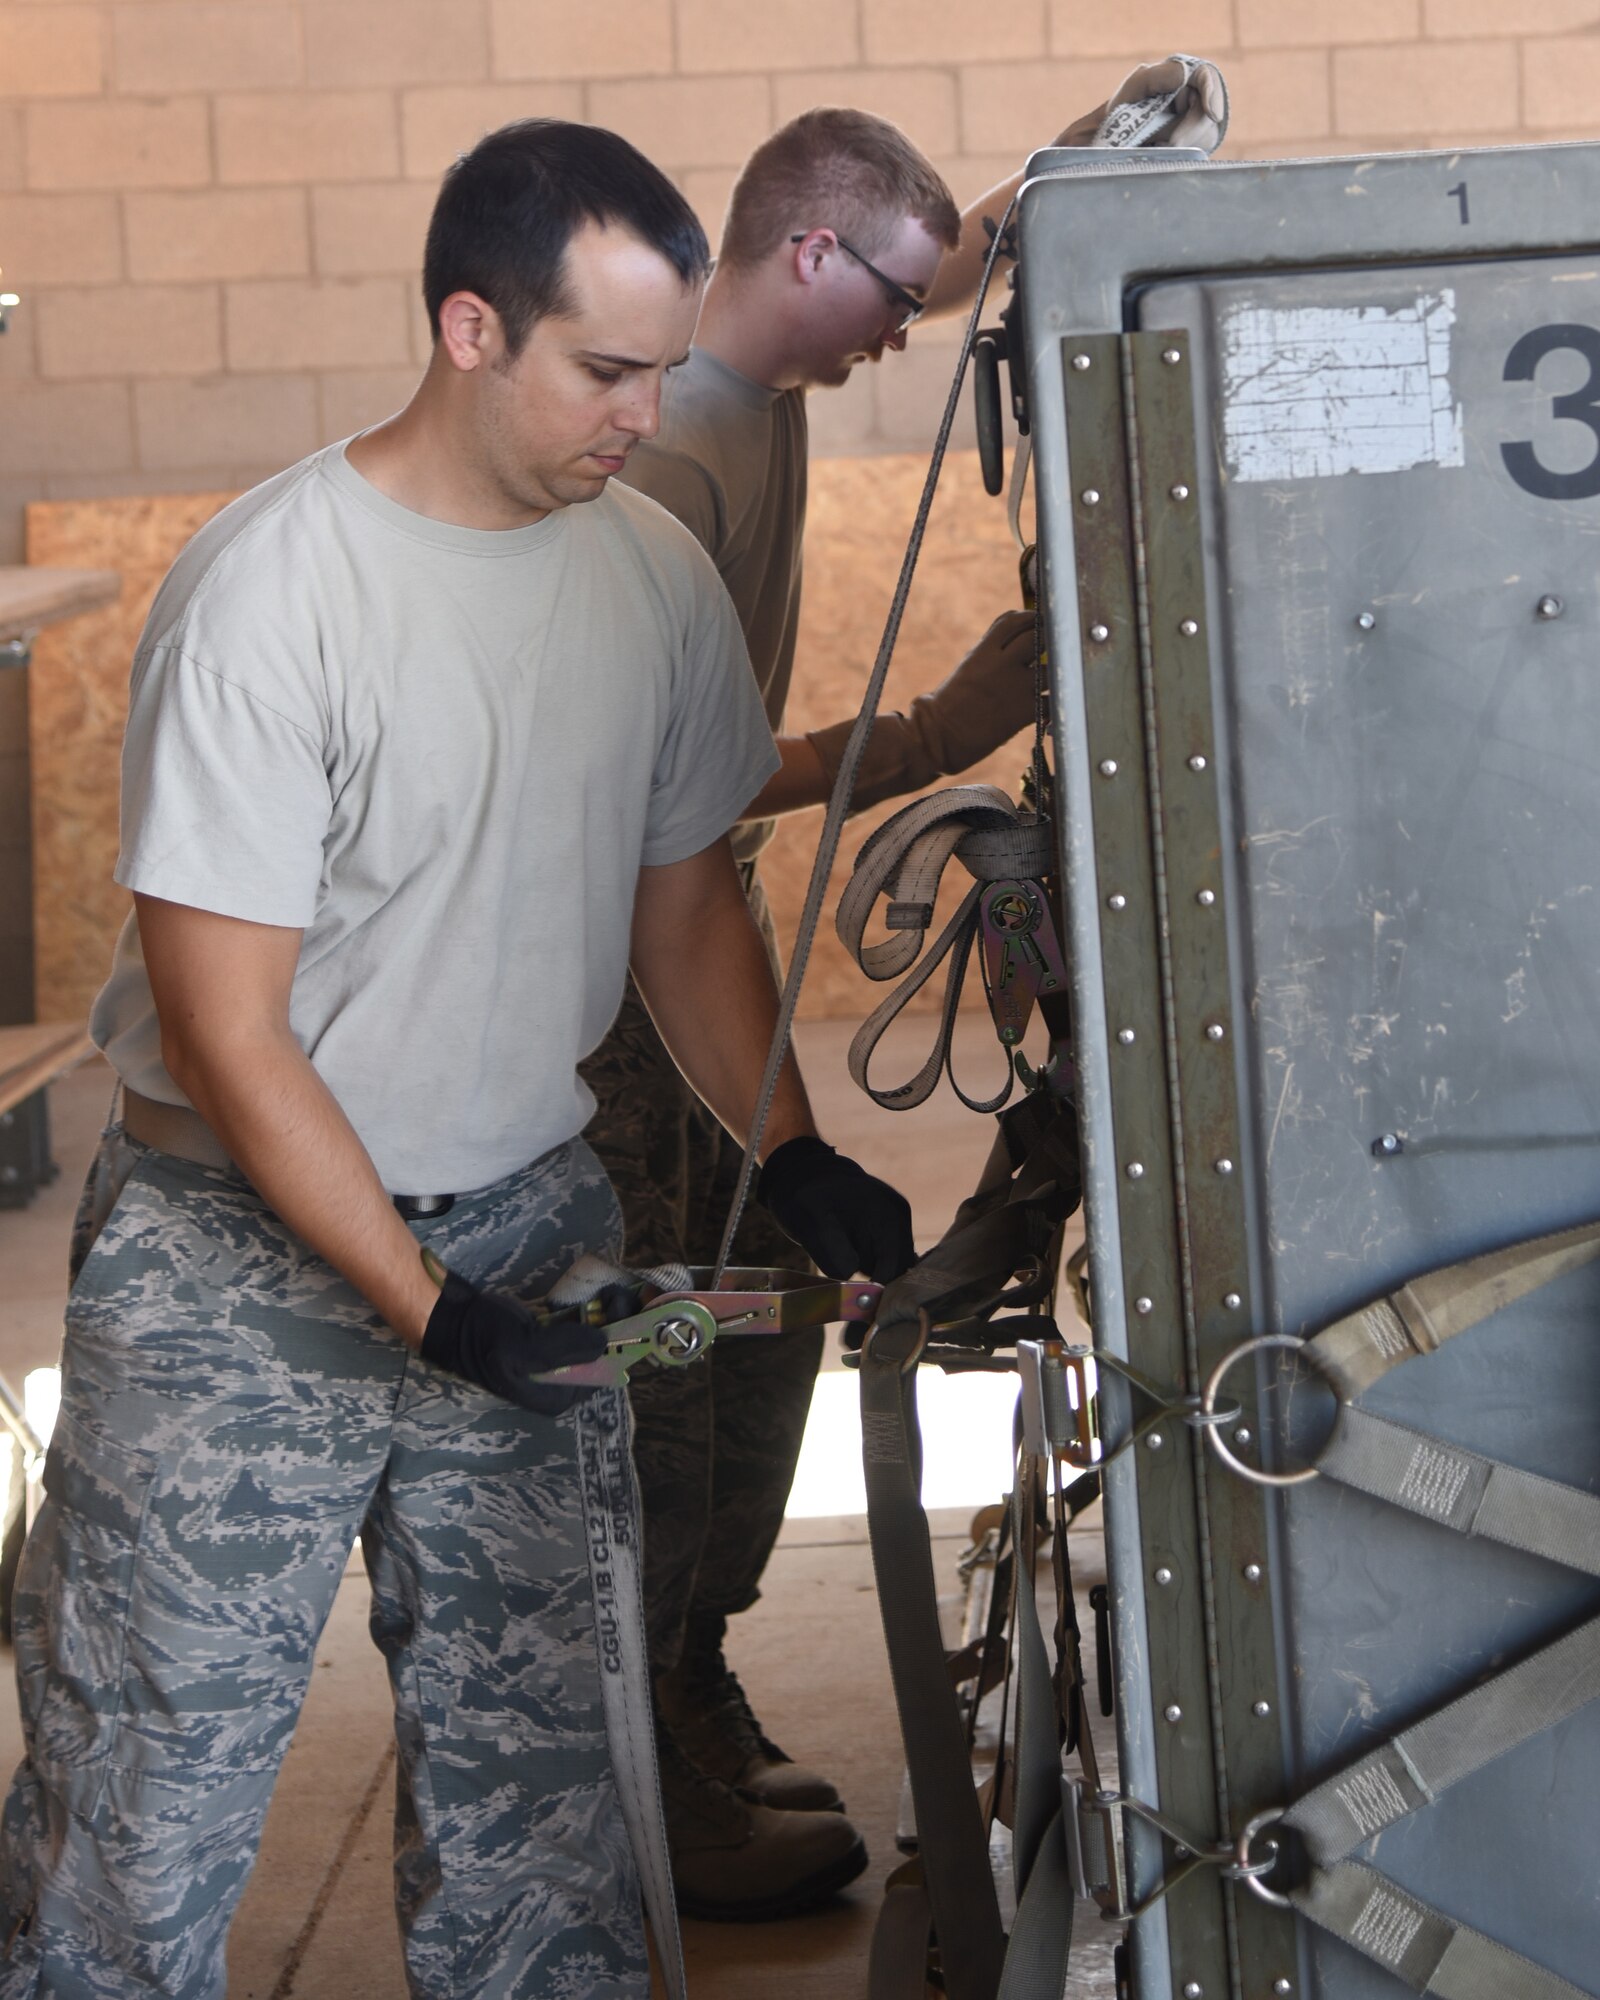 Staff Sgt. Zachary Milne and Staff Sgt. Joshua, aircrew flight equipment technicians with the 161st Air Refueling Wing, secure cargo netting to a pallet during a cargo pallet preparation class at Goldwater Air National Guard Base, June 3, 2018. Properly securing cargo netting and load straps insure that cargo does not shift while being transported. (U.S. Air National Guard photo by Staff Sgt. Wes Parrell)